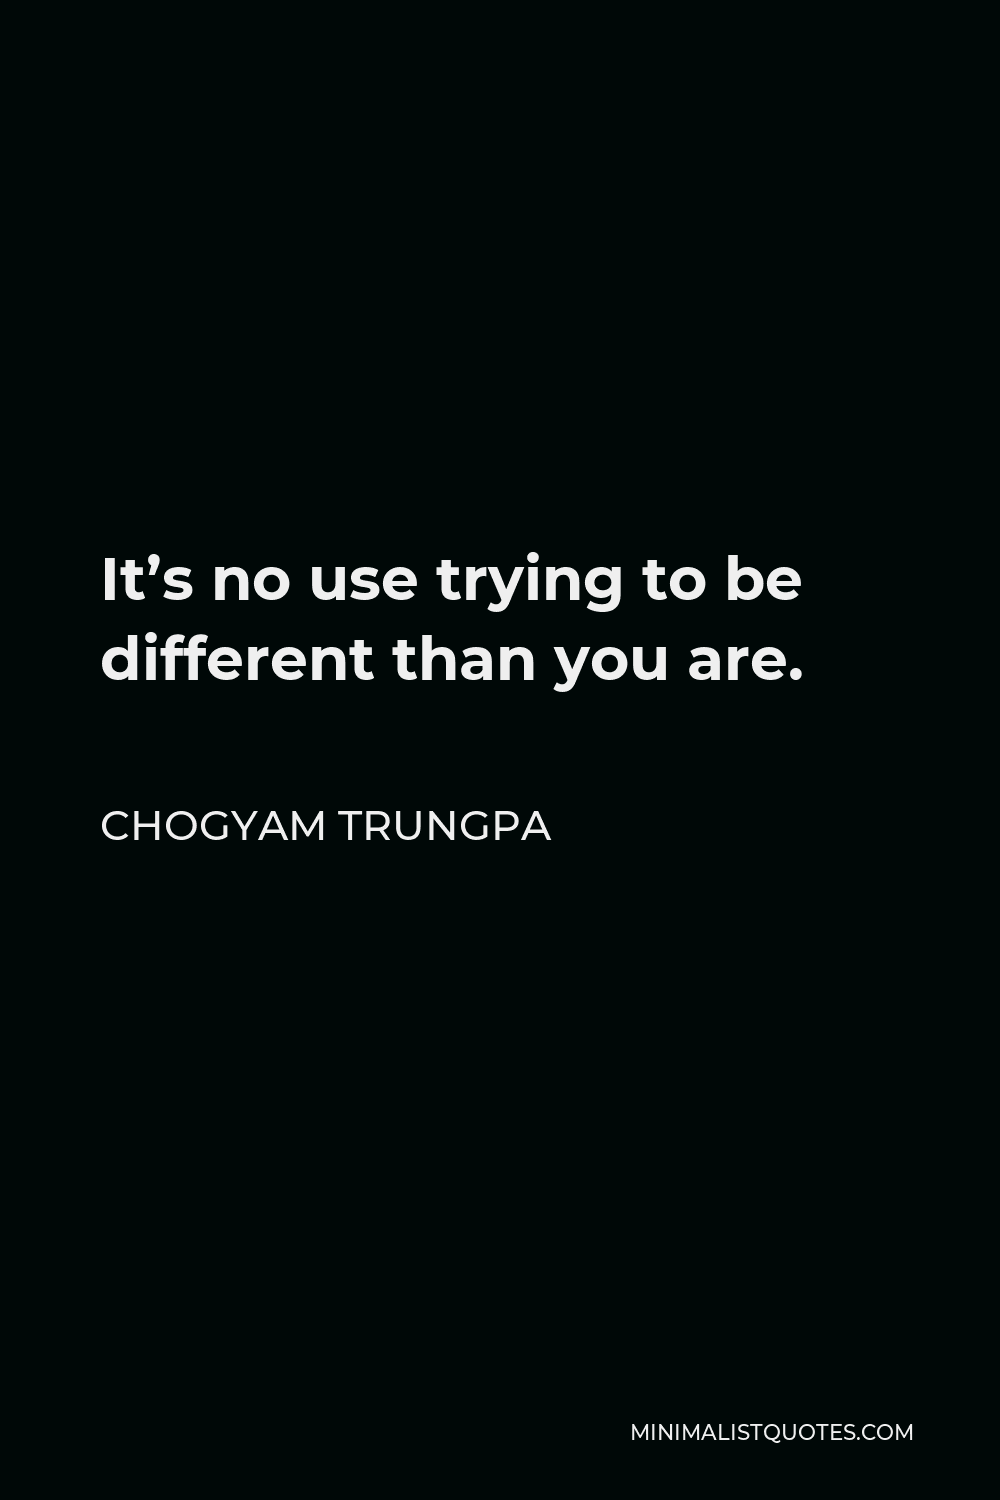 Chogyam Trungpa Quote - It’s no use trying to be different than you are.